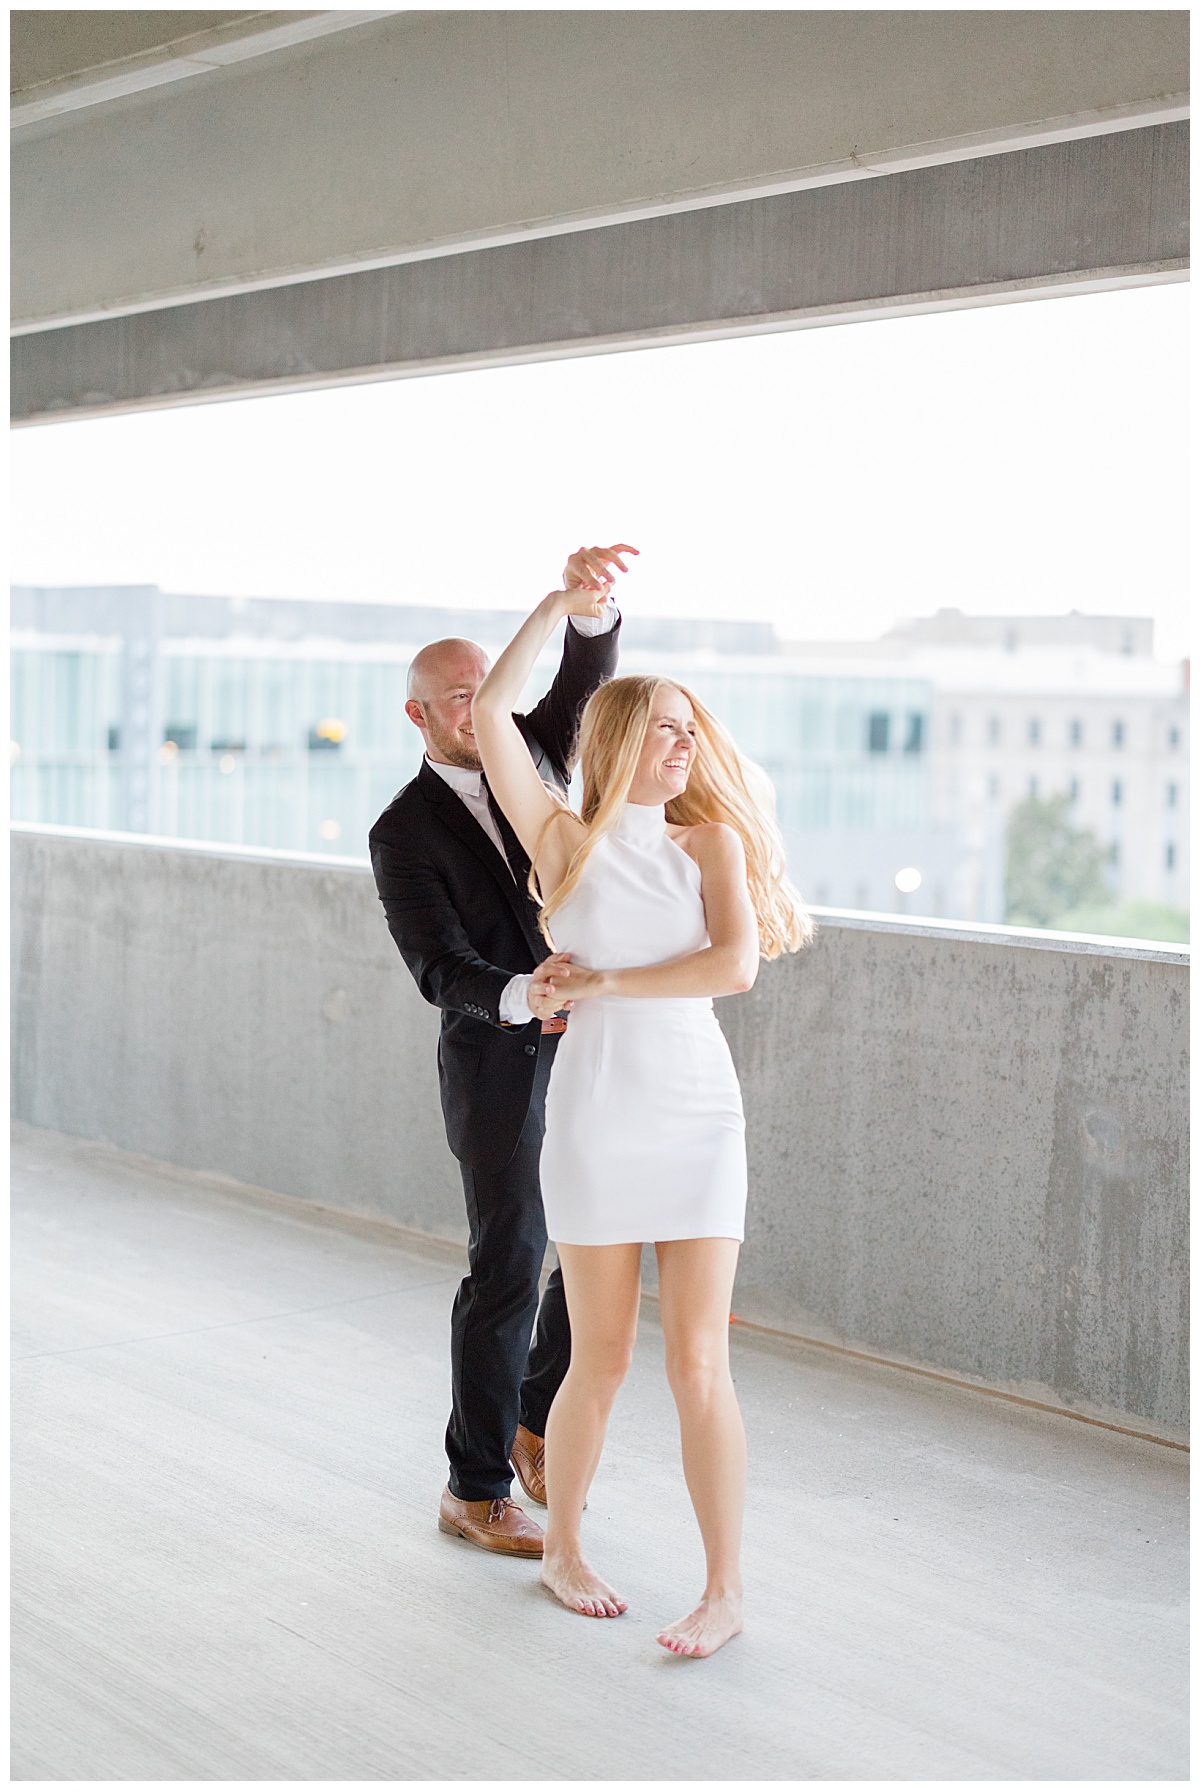 man spins woman while dancing on rooftop by Hunter Hennes Photography